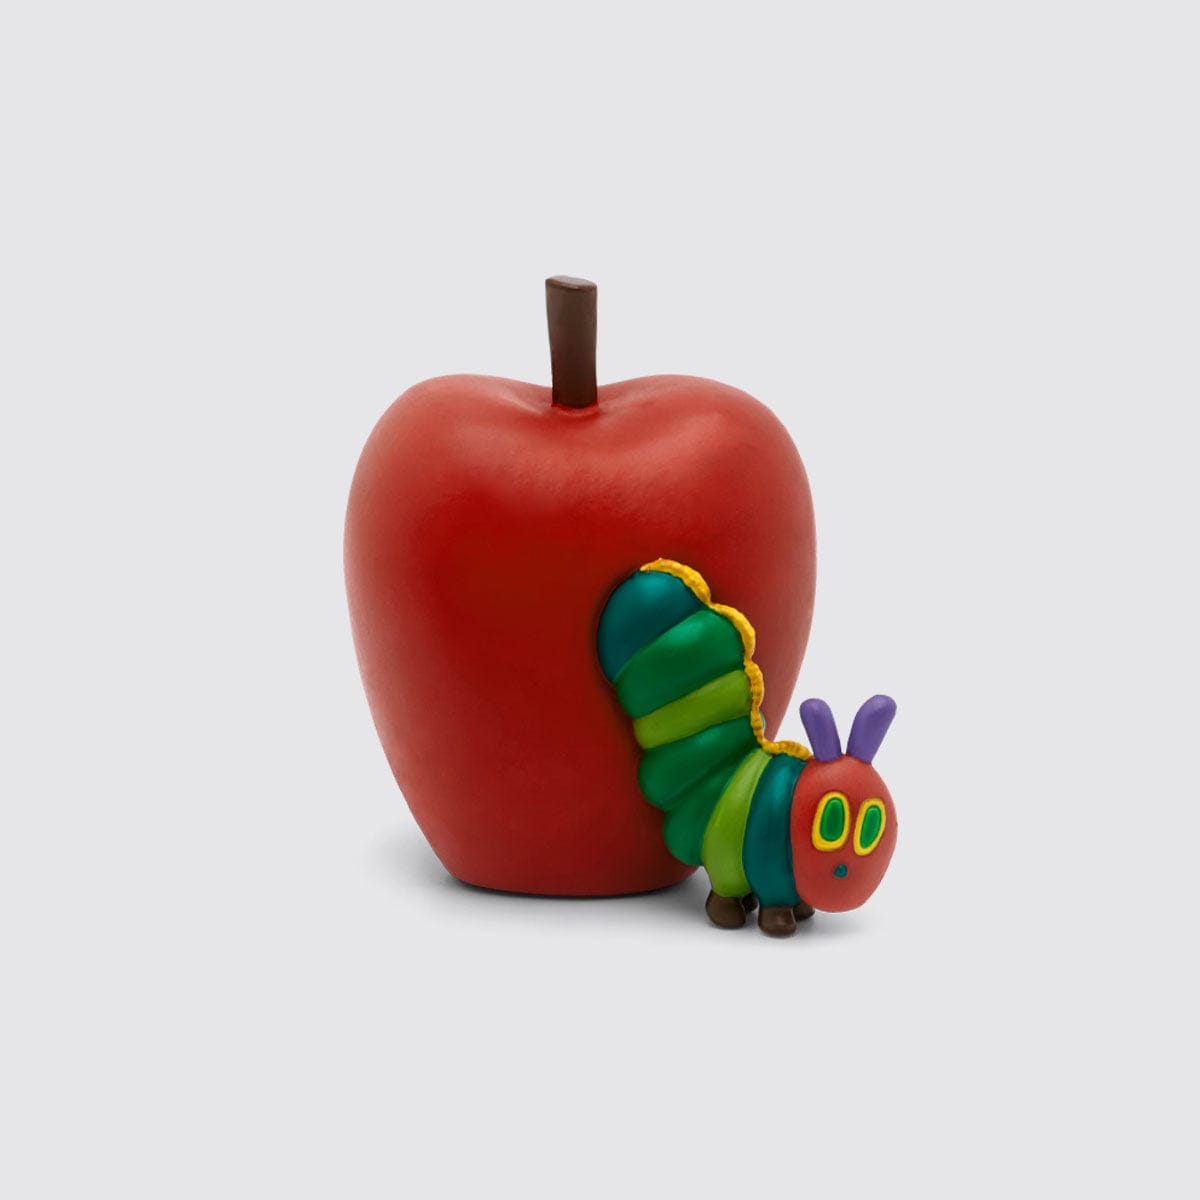 New and beautiful children's stories - The Very Hungry Caterpillar